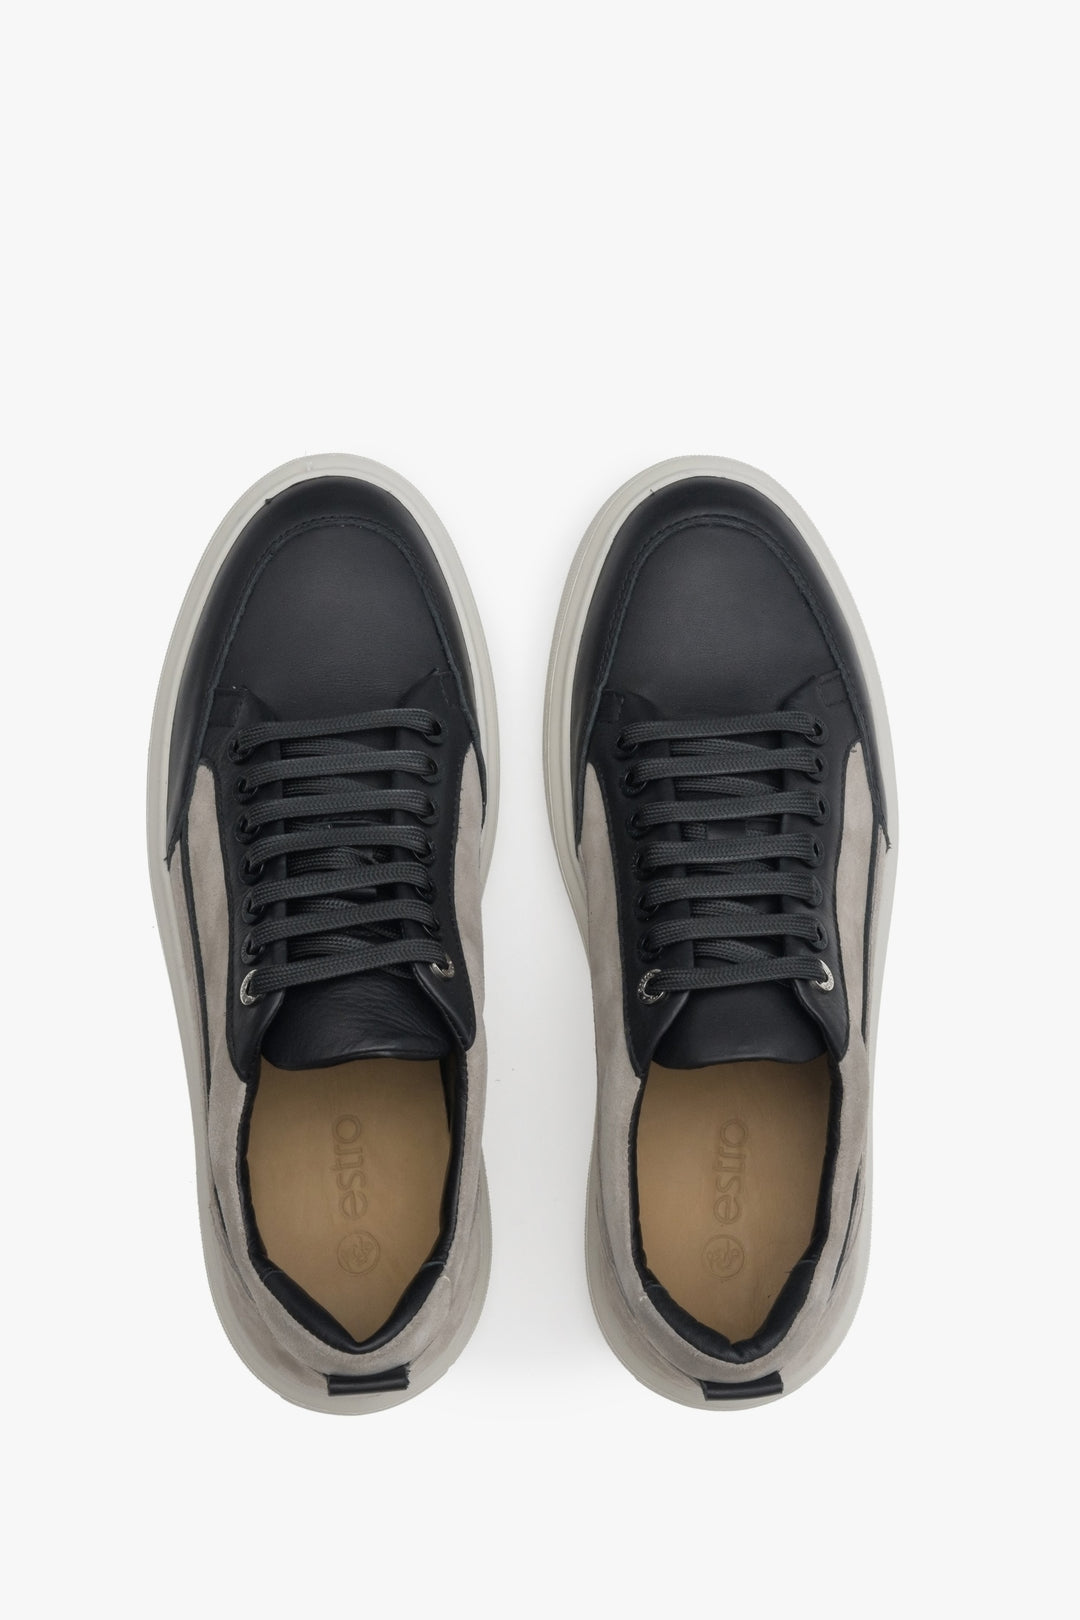 Men's velour sneakers with lacing in grey and black - presentation of the model from above.